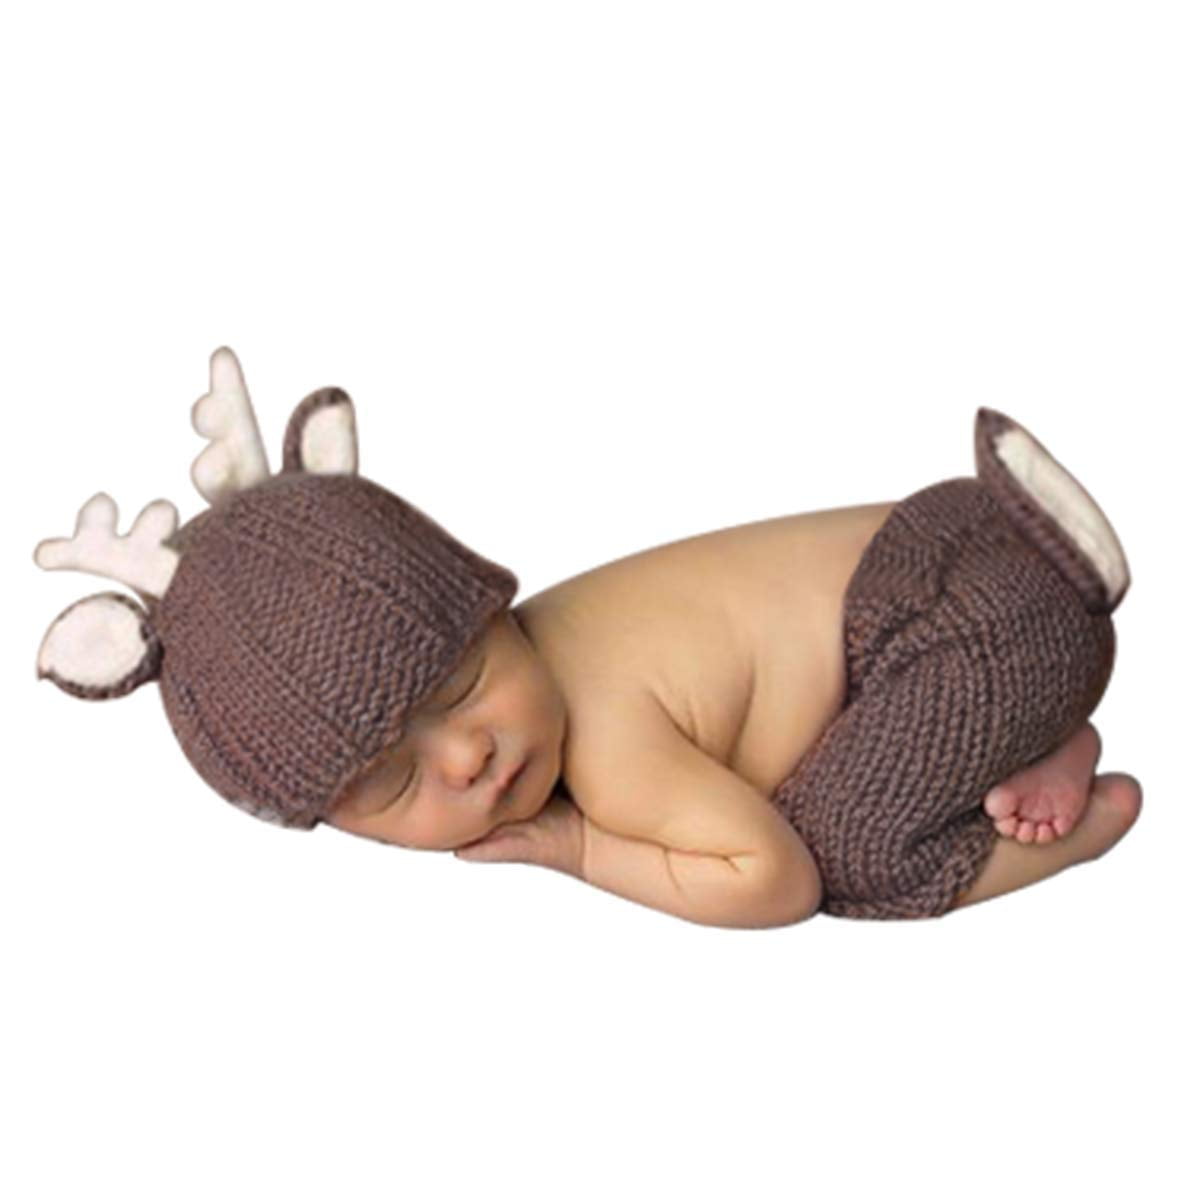 Newborn Baby Girls Boys Crochet Knit Costume Photography Photo Props Outfit Deer 